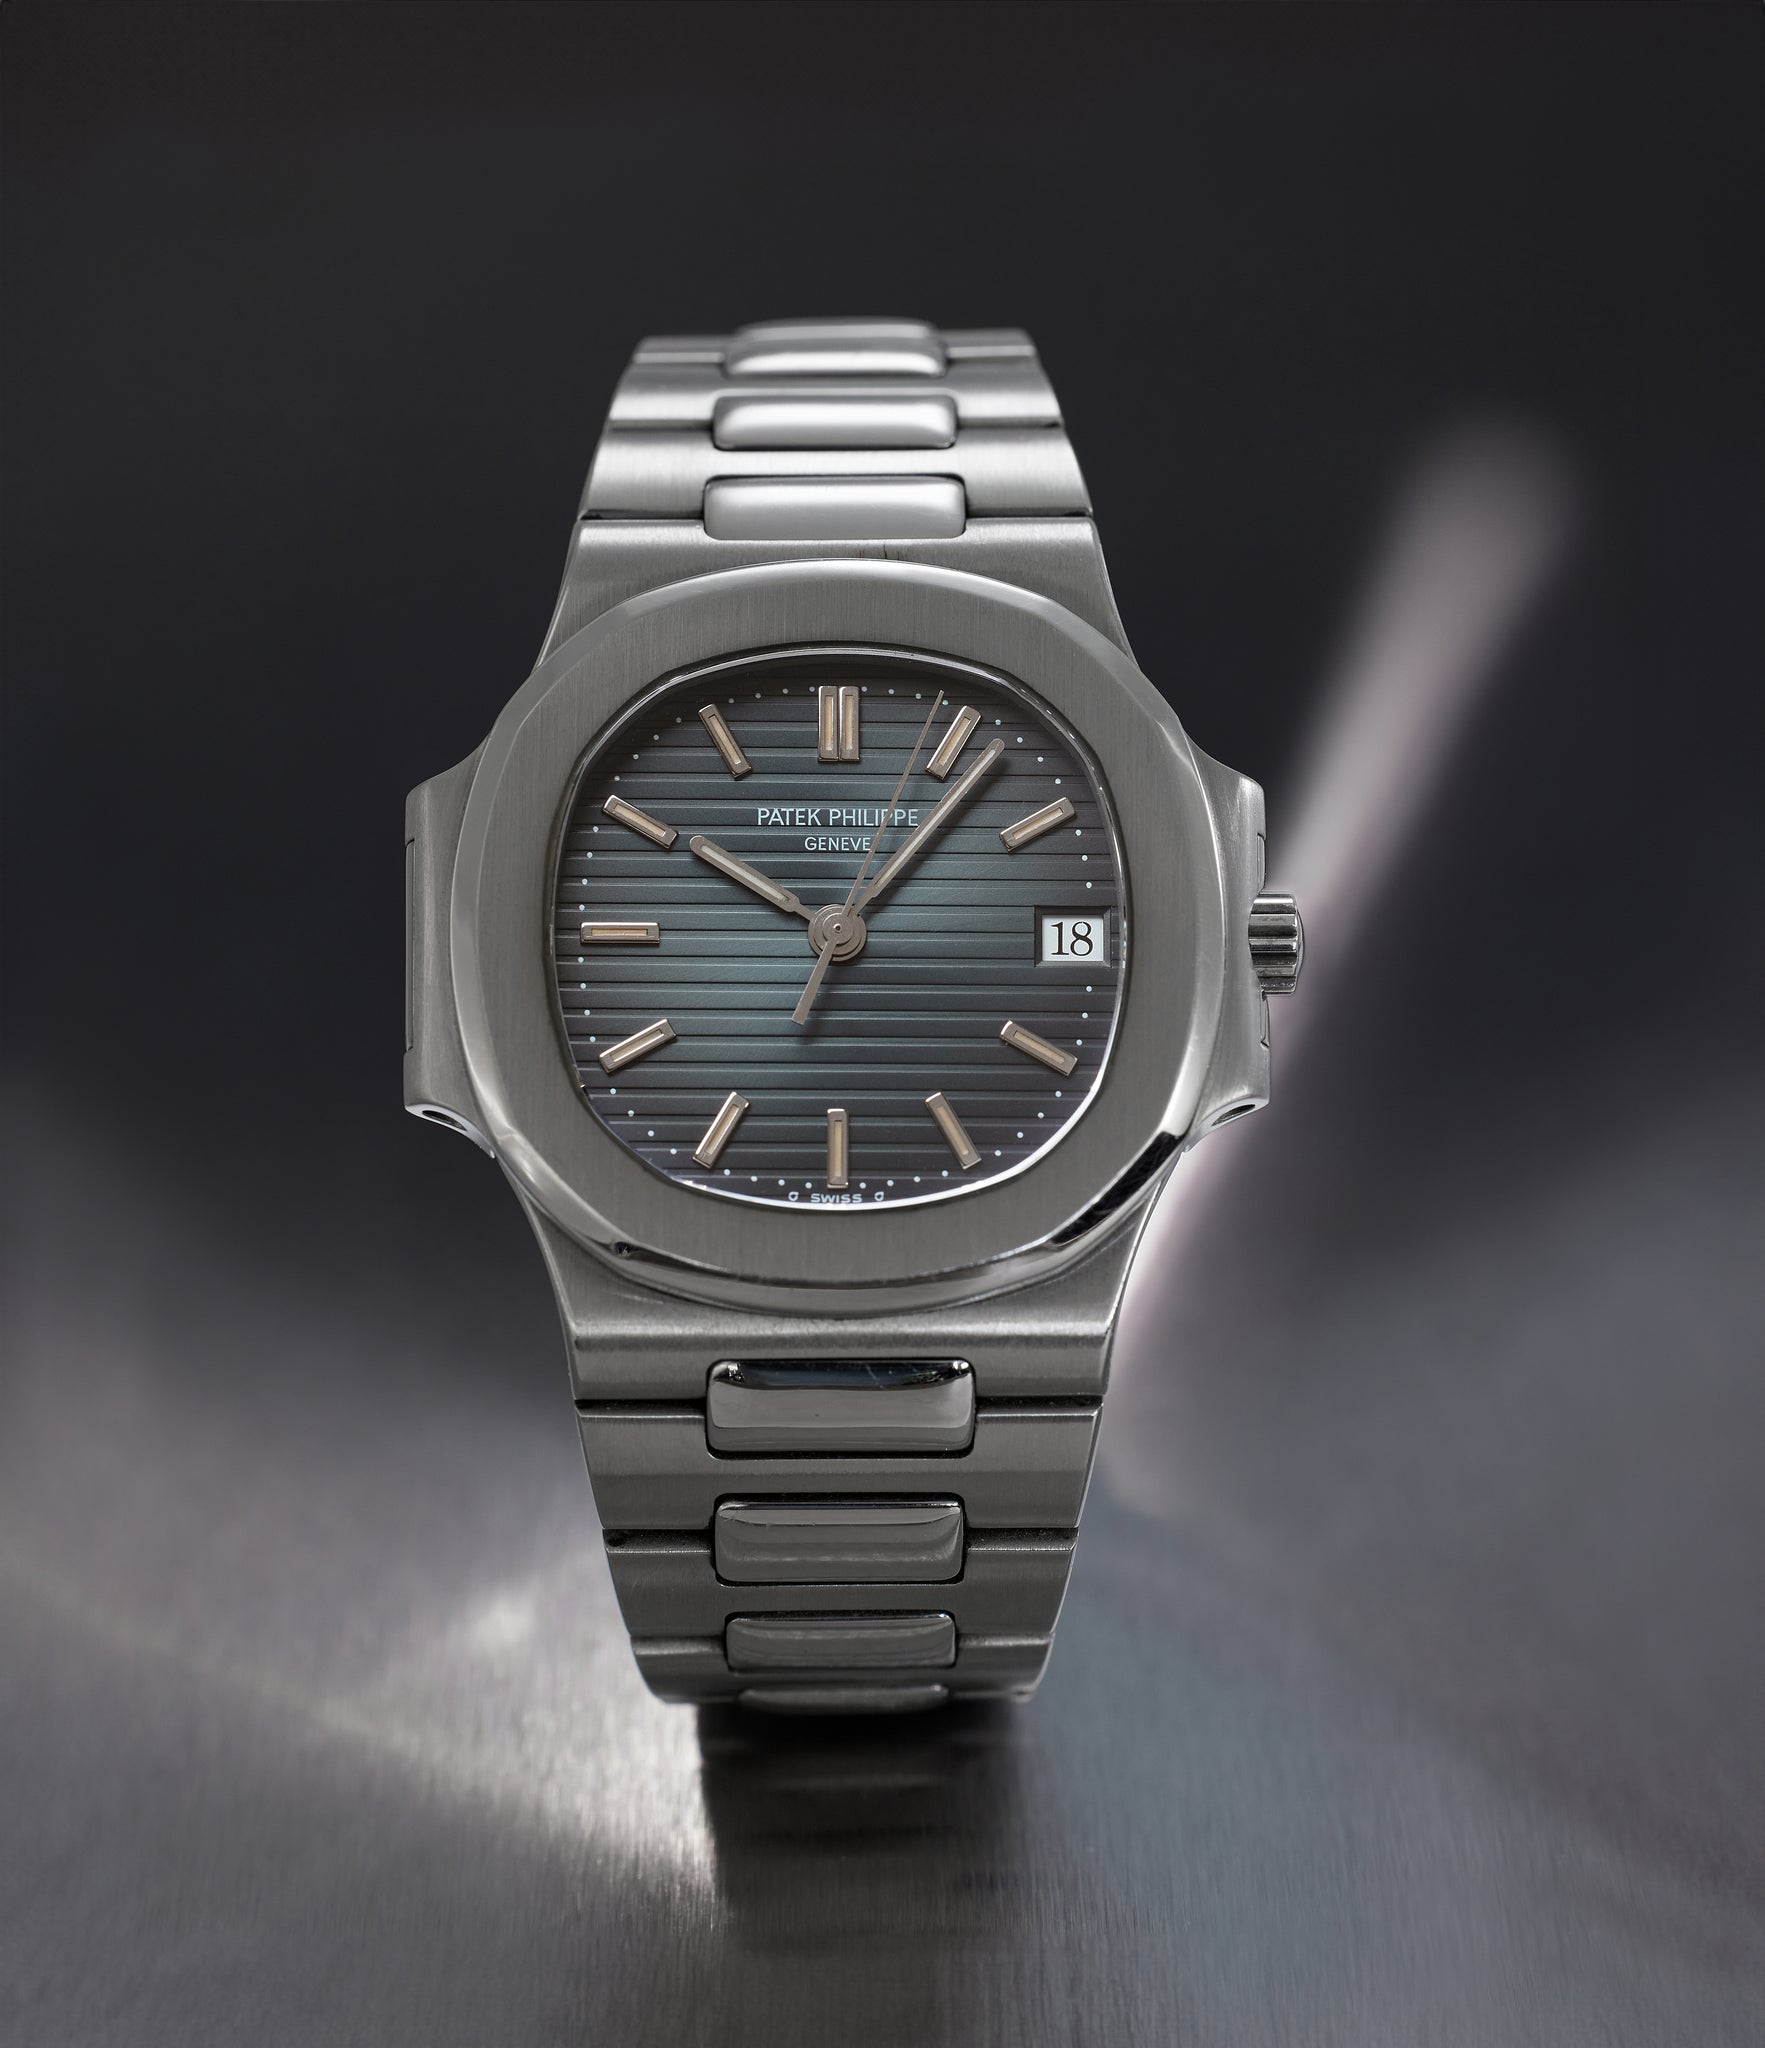 Patek Philippe Nautilus 3800/1A Stainless Steel preowned watch at A Collected Man London